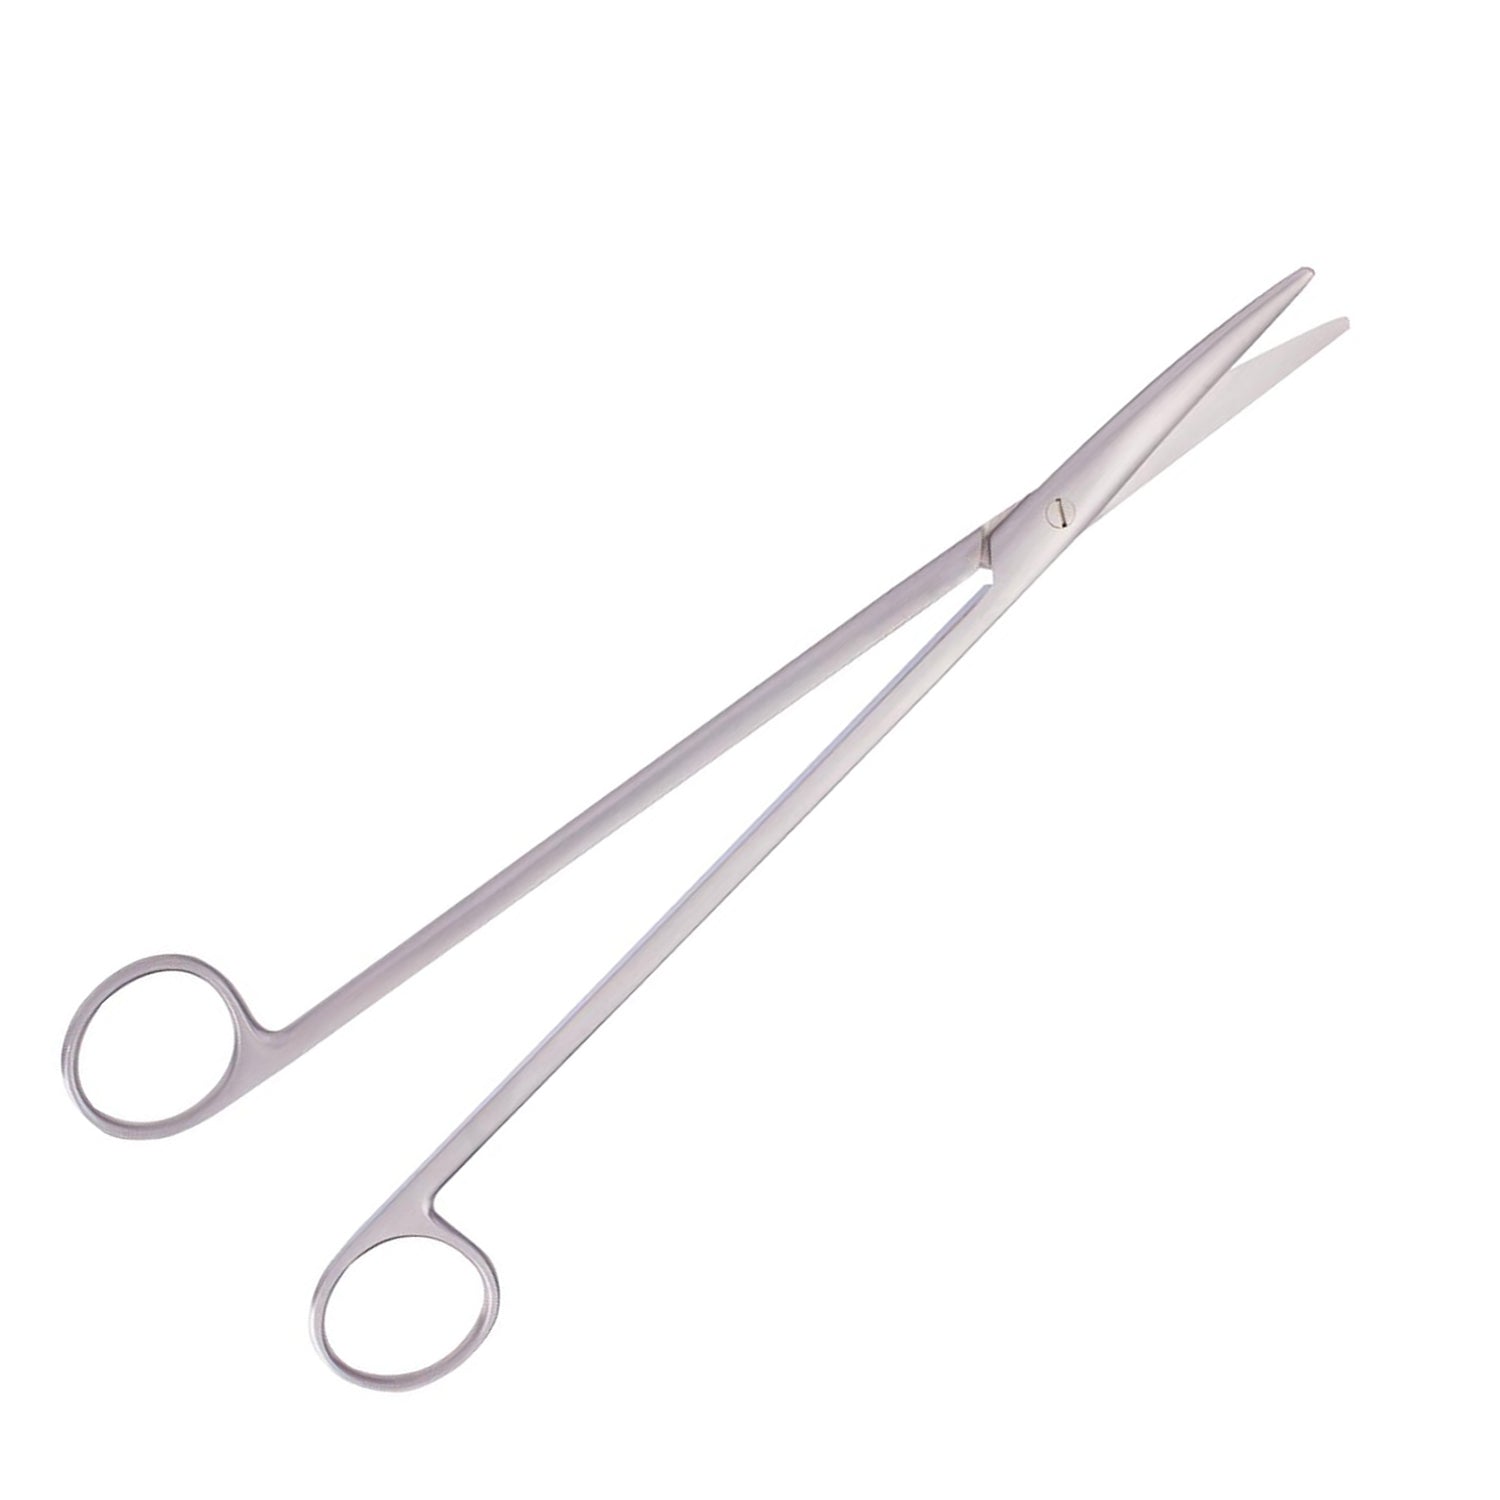 Nelson Lung Dissecting Scissors